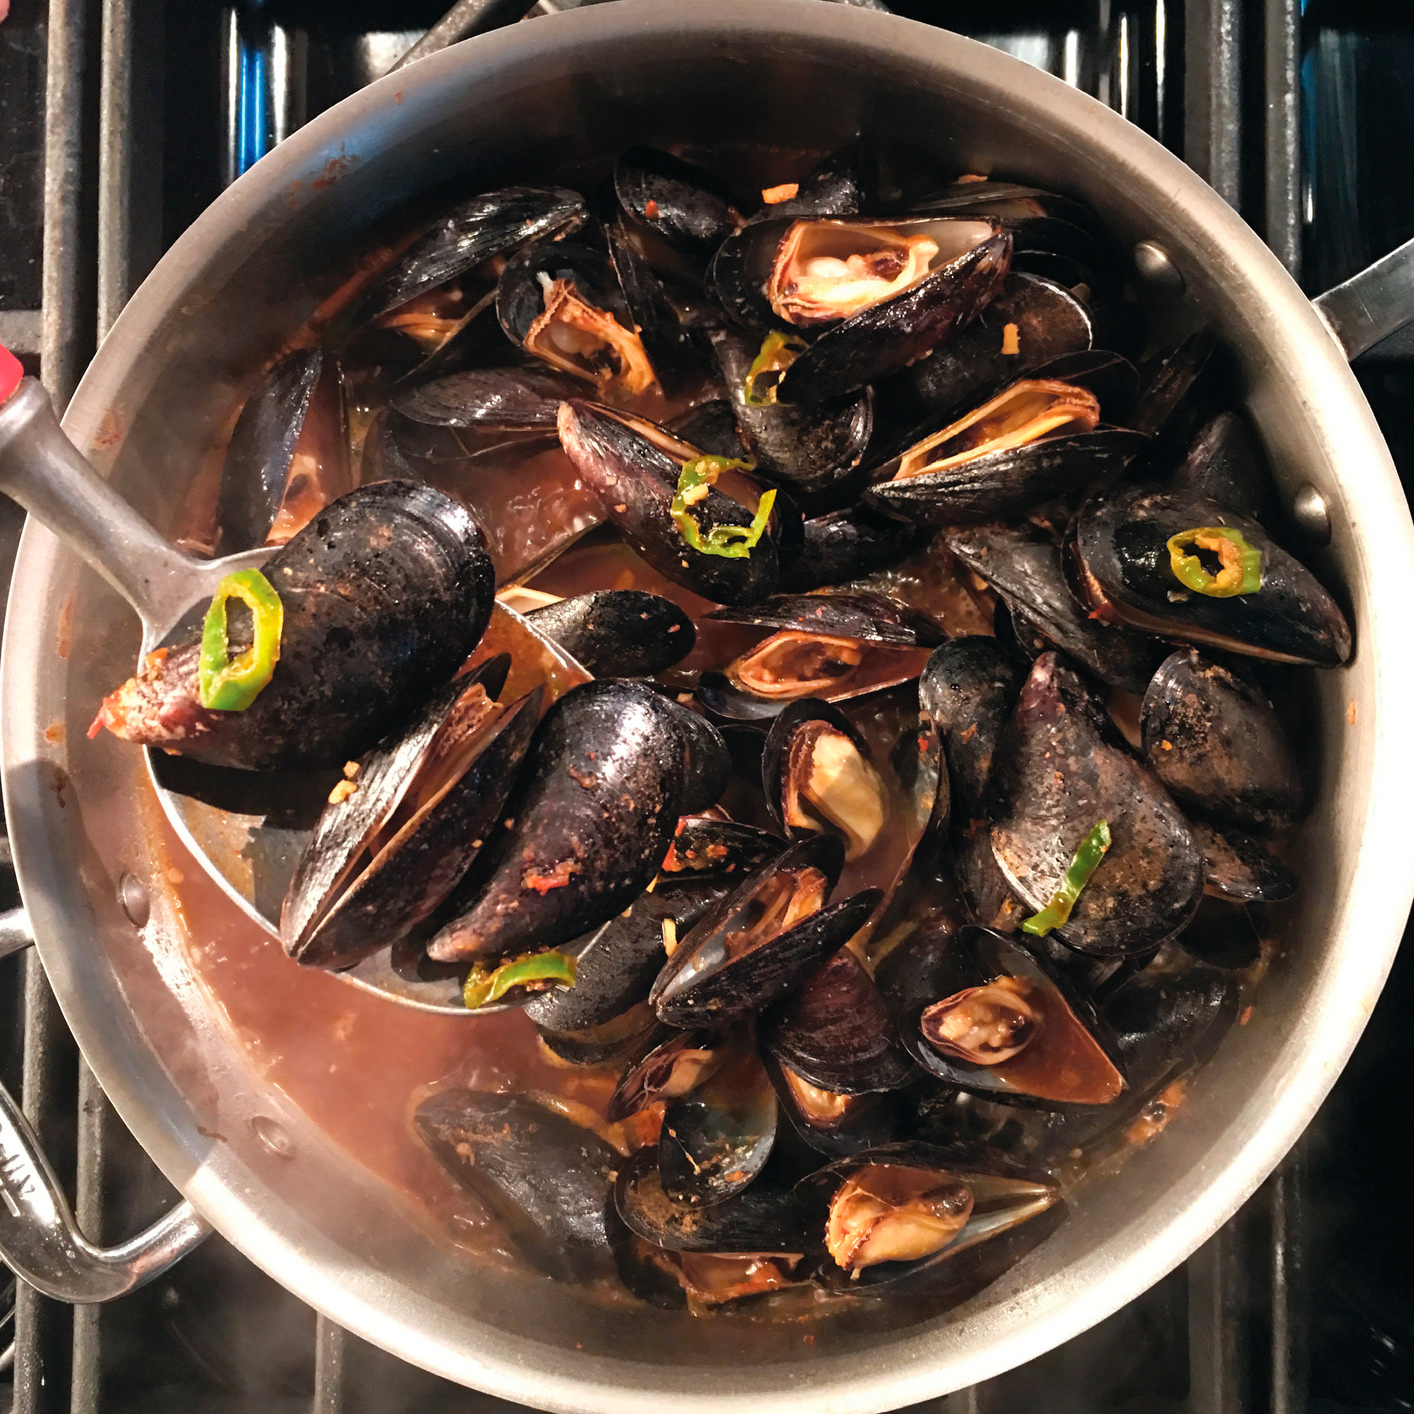 Mussels-O-Miso